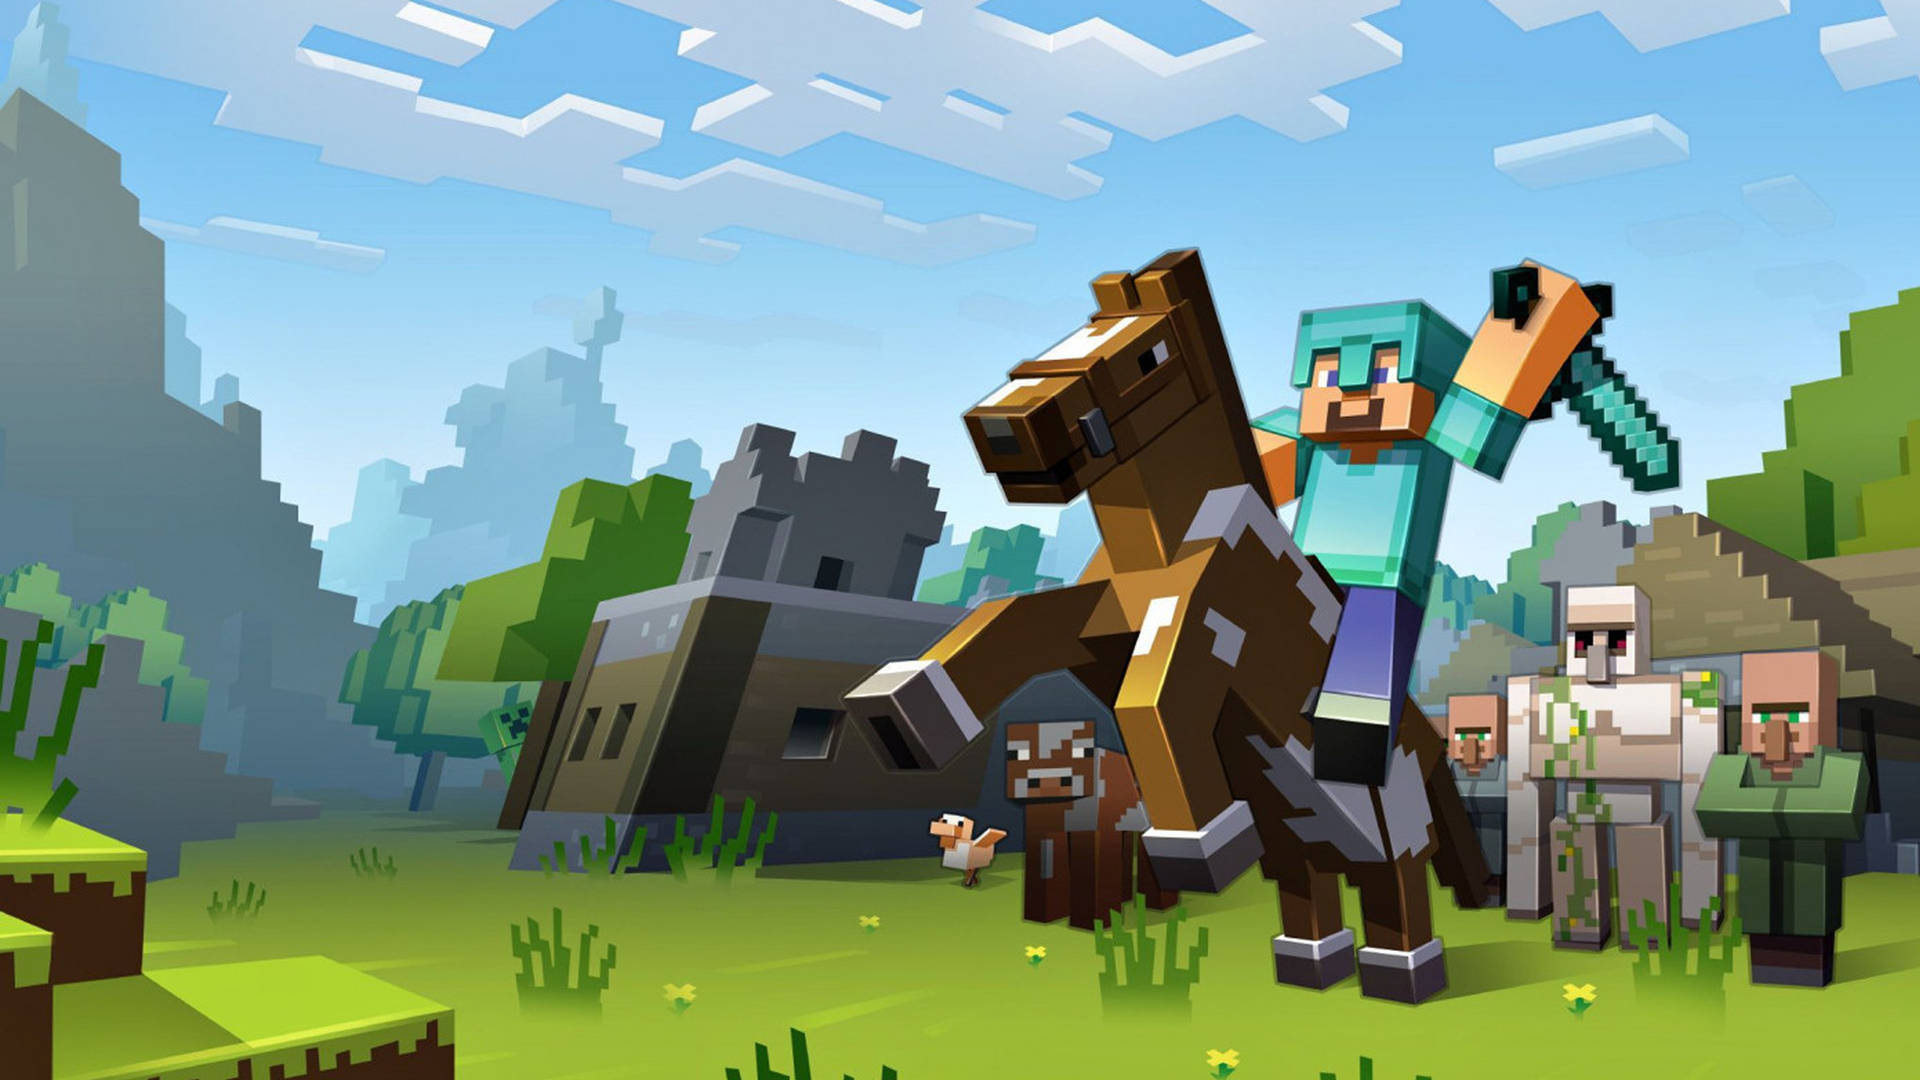 Armored Steve On A Horse 2560x1440 Minecraft Wallpaper